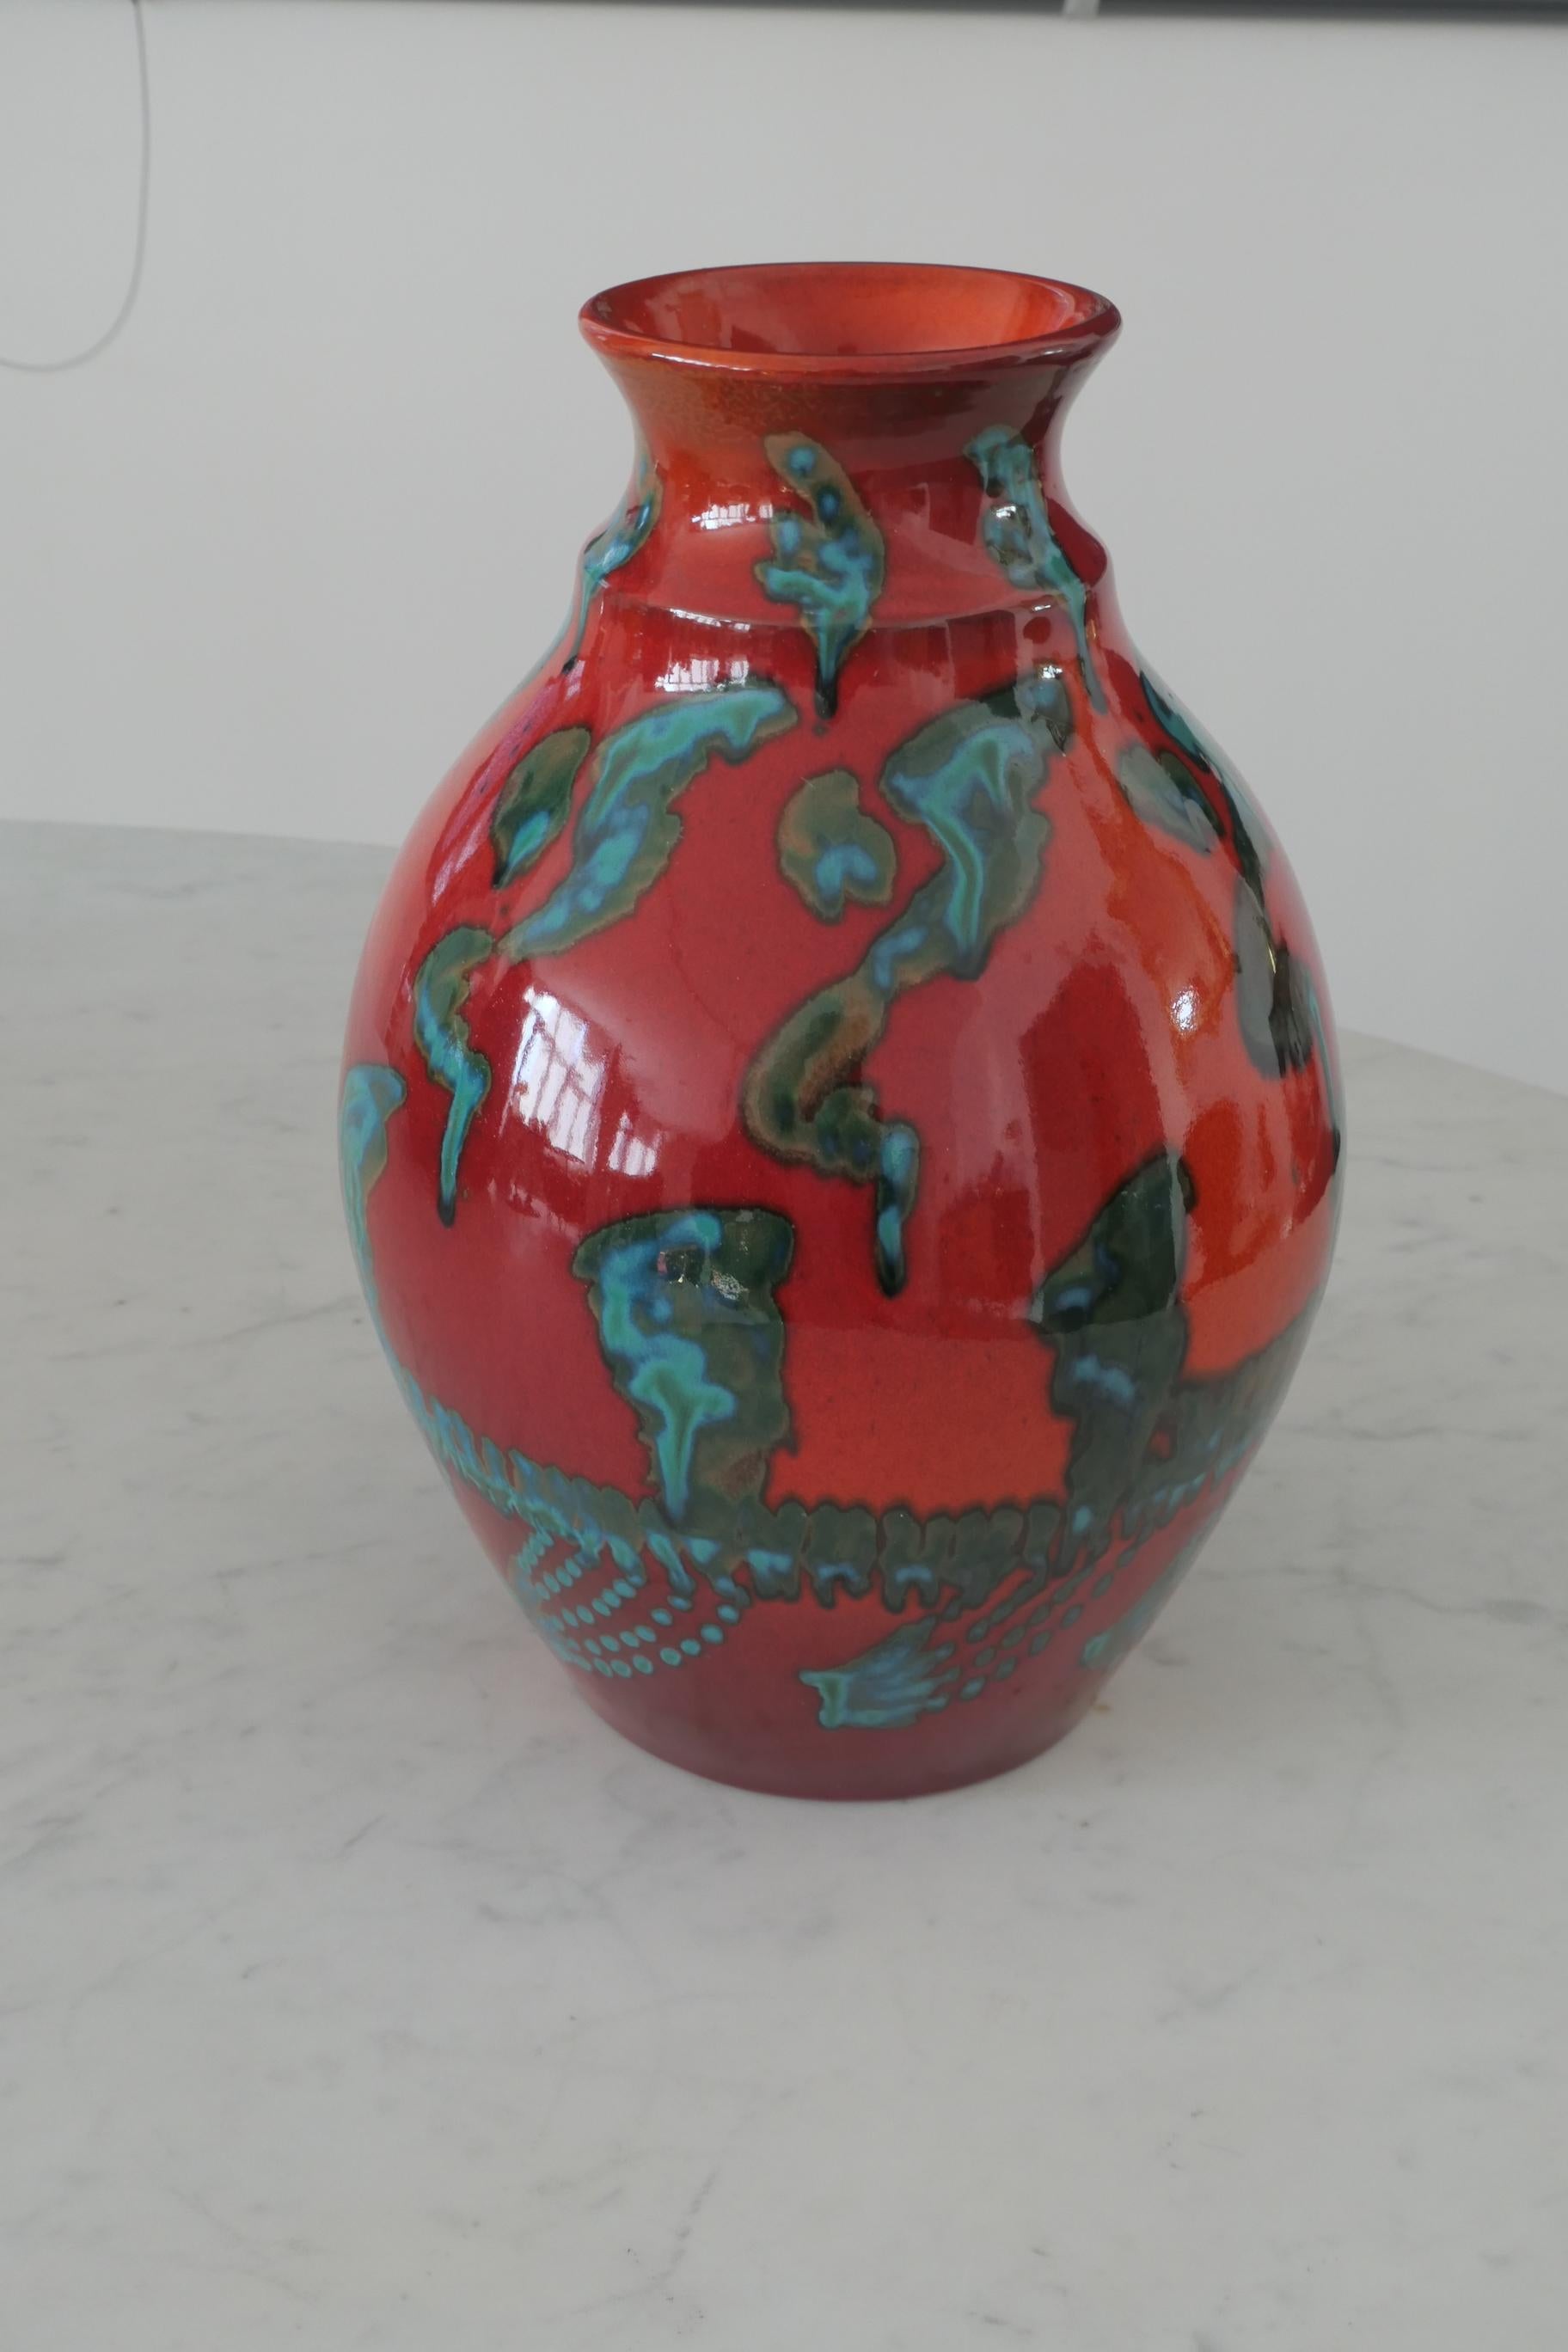 An Italian vintage ceramic vase crafted in deep rich red and blue abstract forms.
Signed Gaetano Fichera, Italy, circa 1980s.
A beautiful decorative statement piece for any living area.